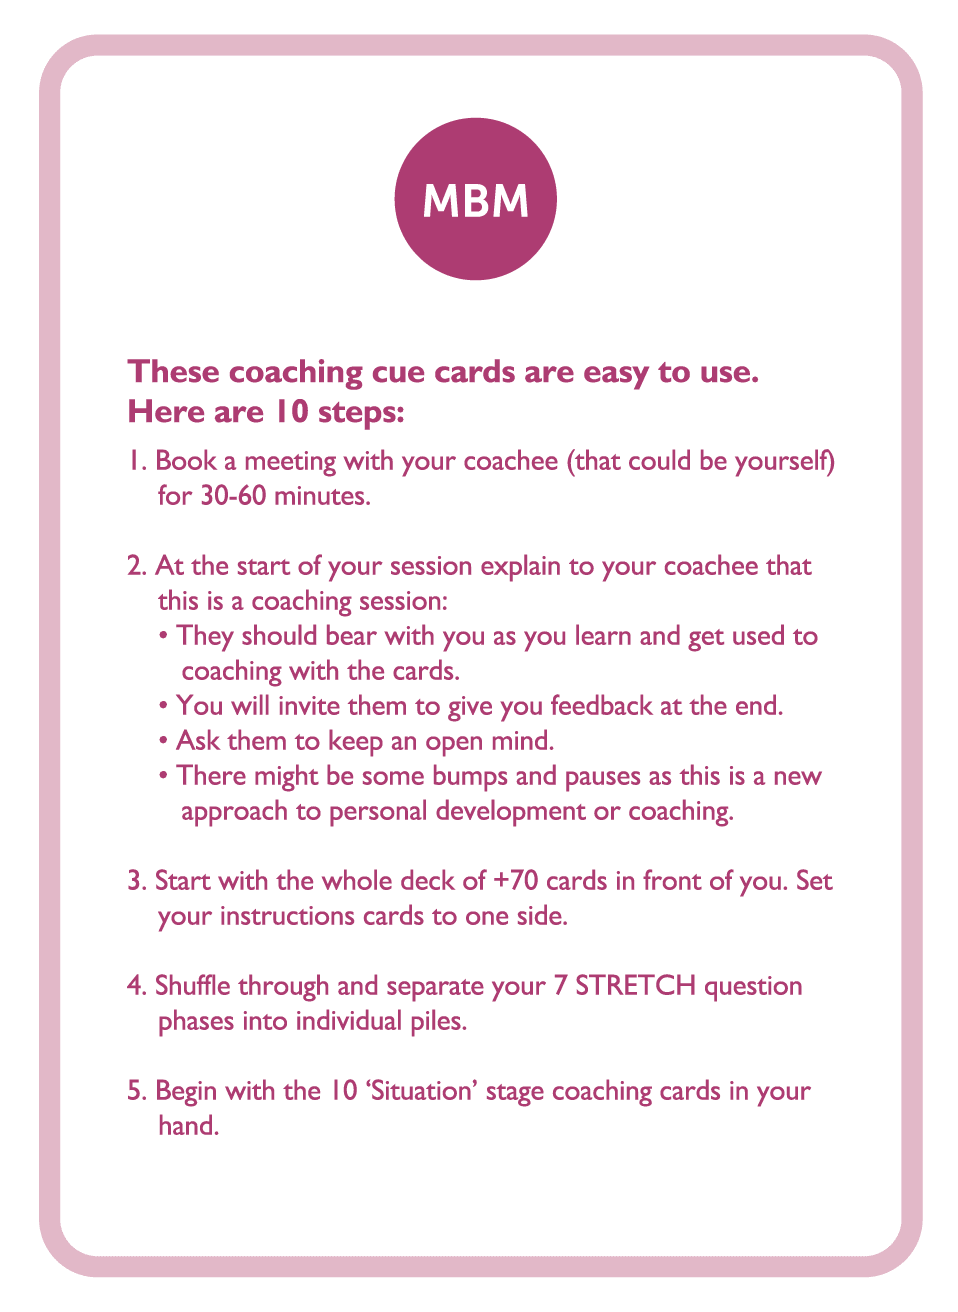 Coaching card titled 10 steps